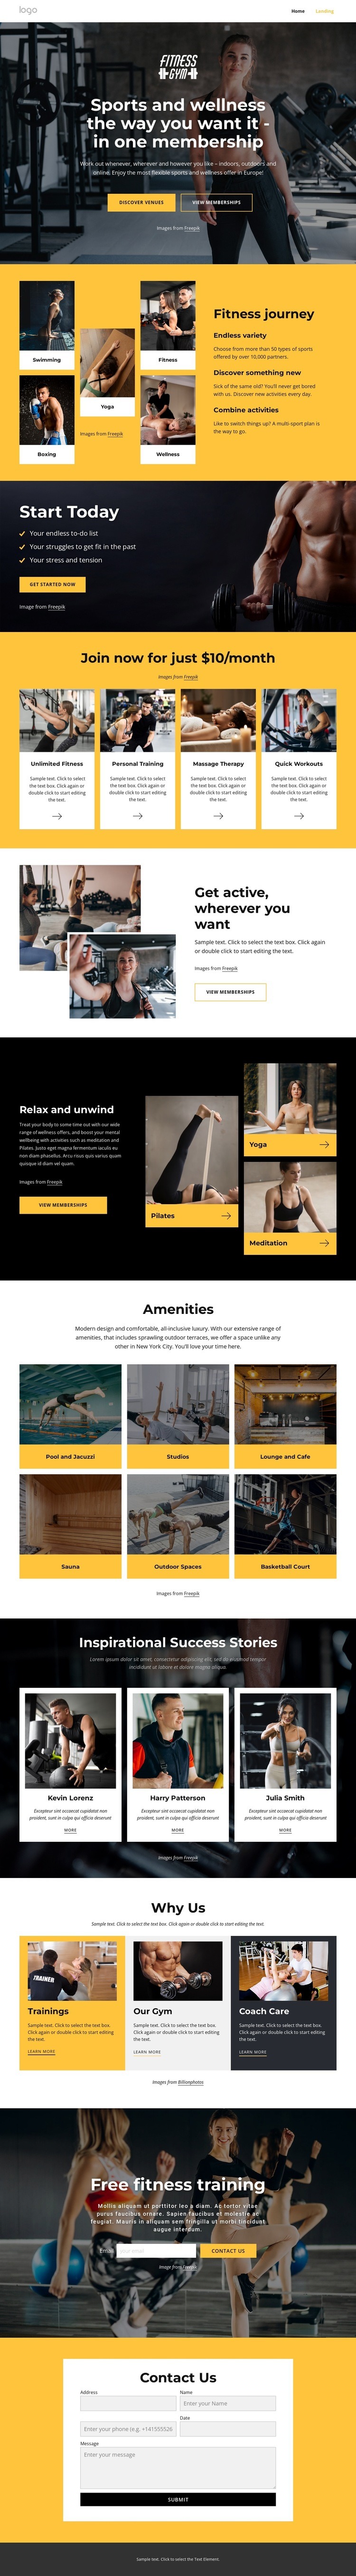 Gym, swimming, fitness classes Homepage Design